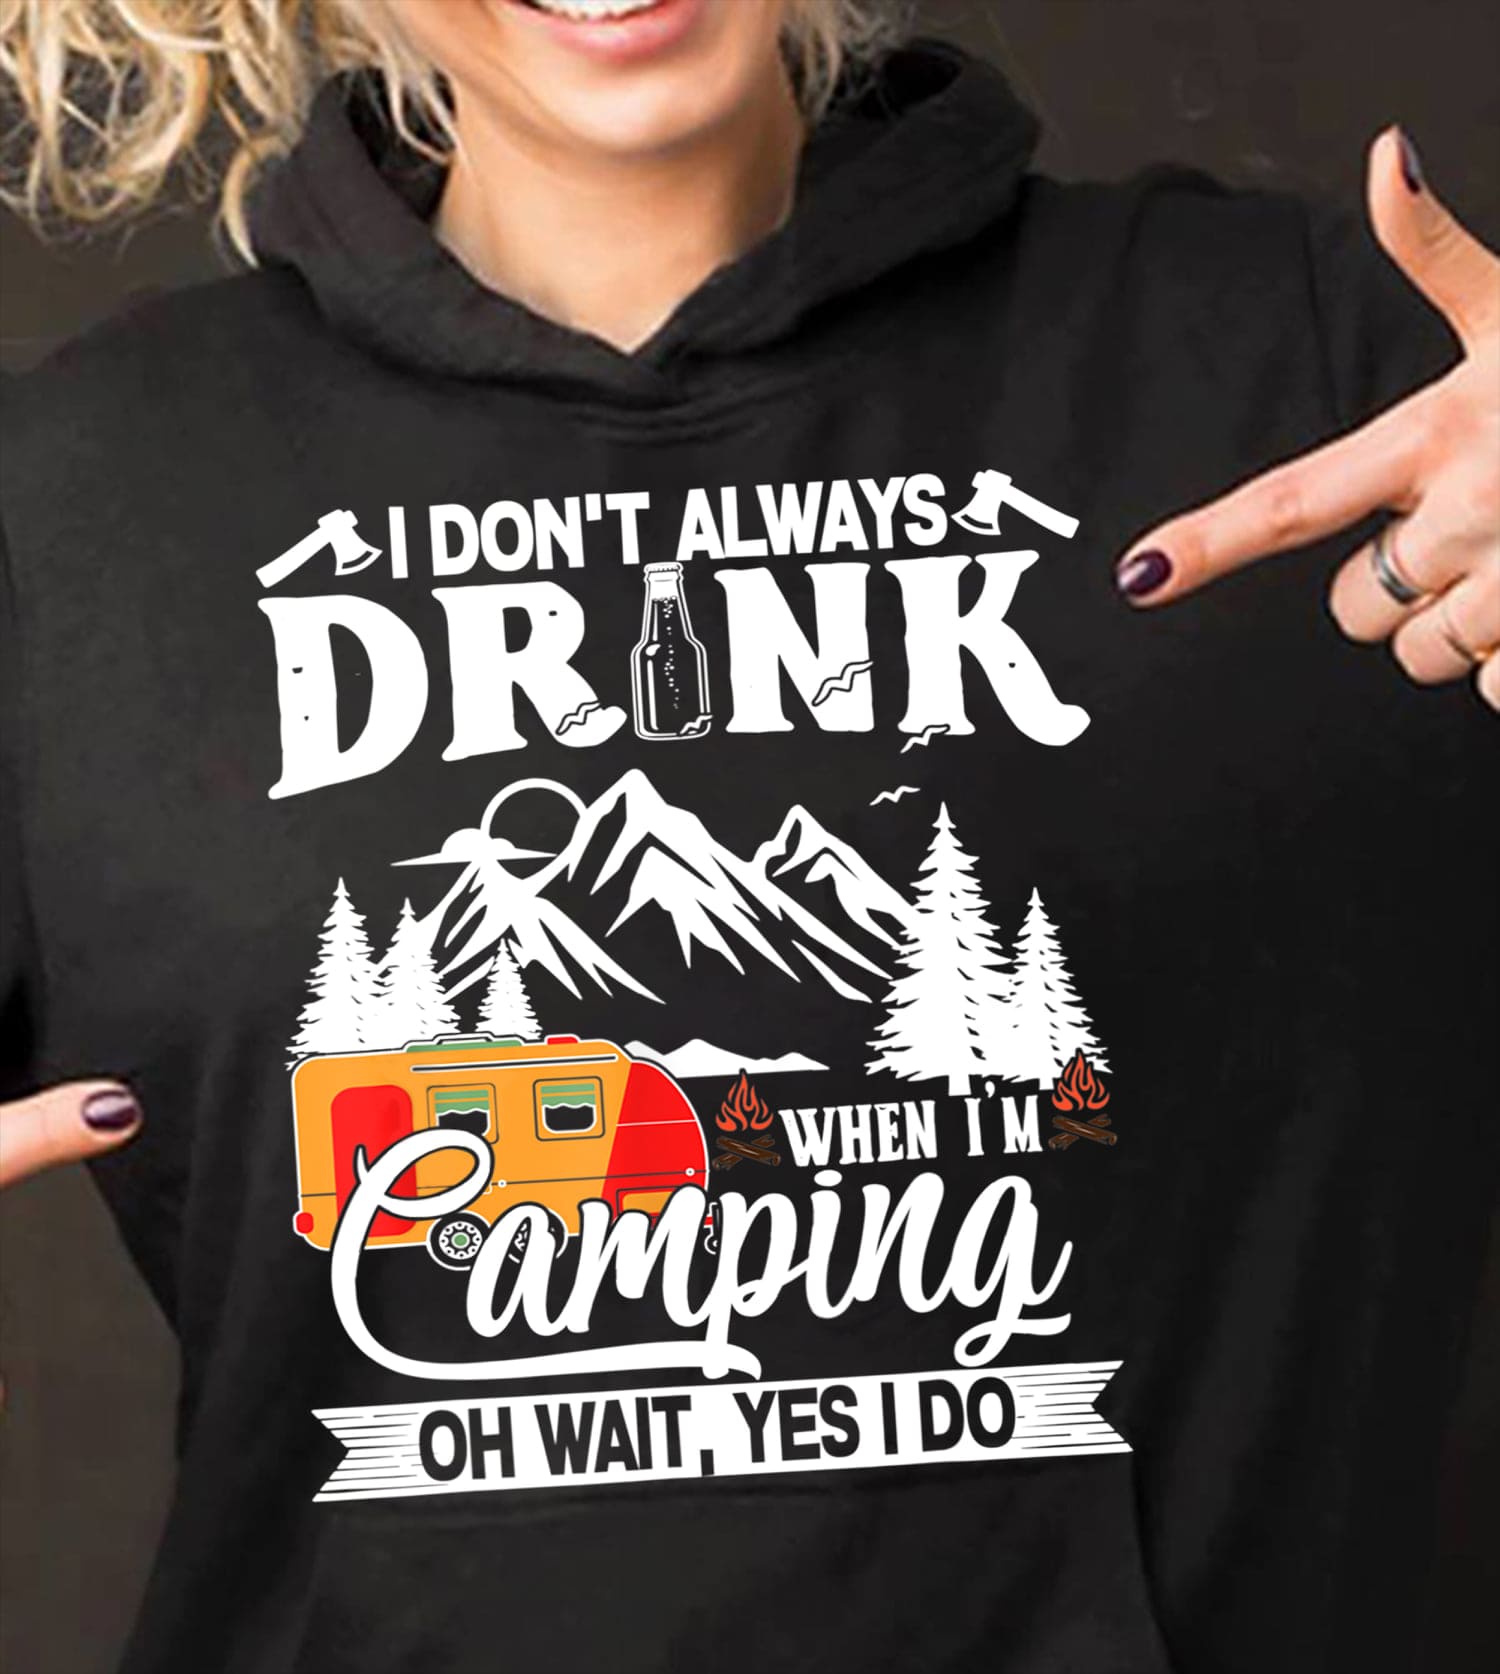 I don't always drink when I'm camping - Camping and drink, camping on the mountain, recreational vehicle graphic